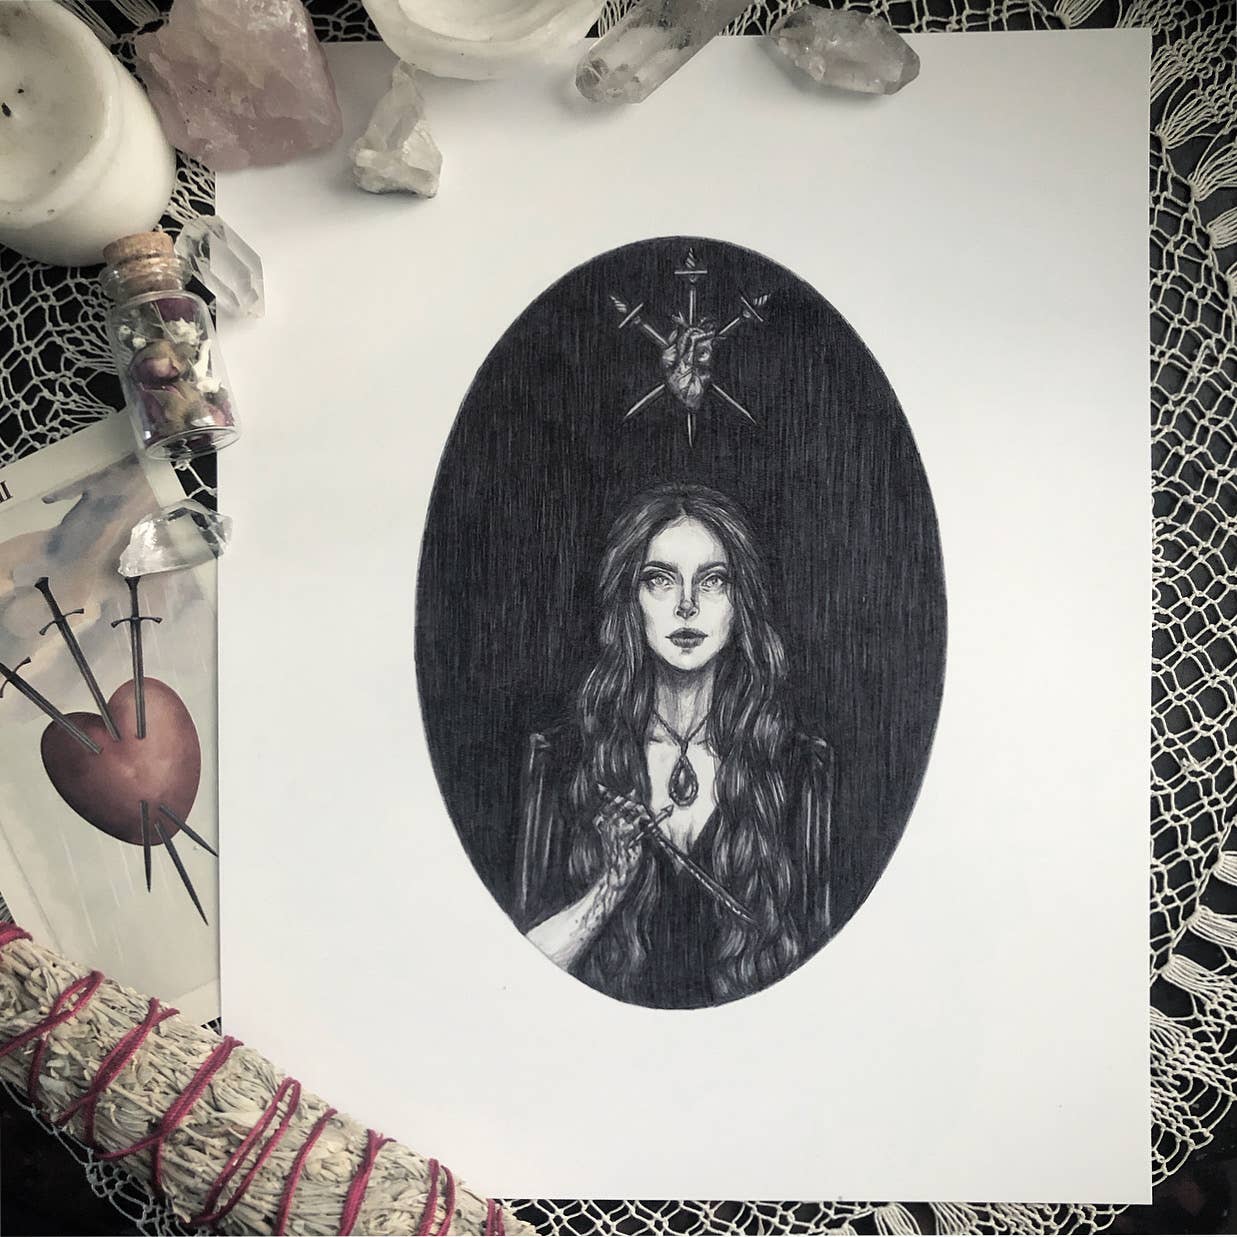 The Love Witch Print